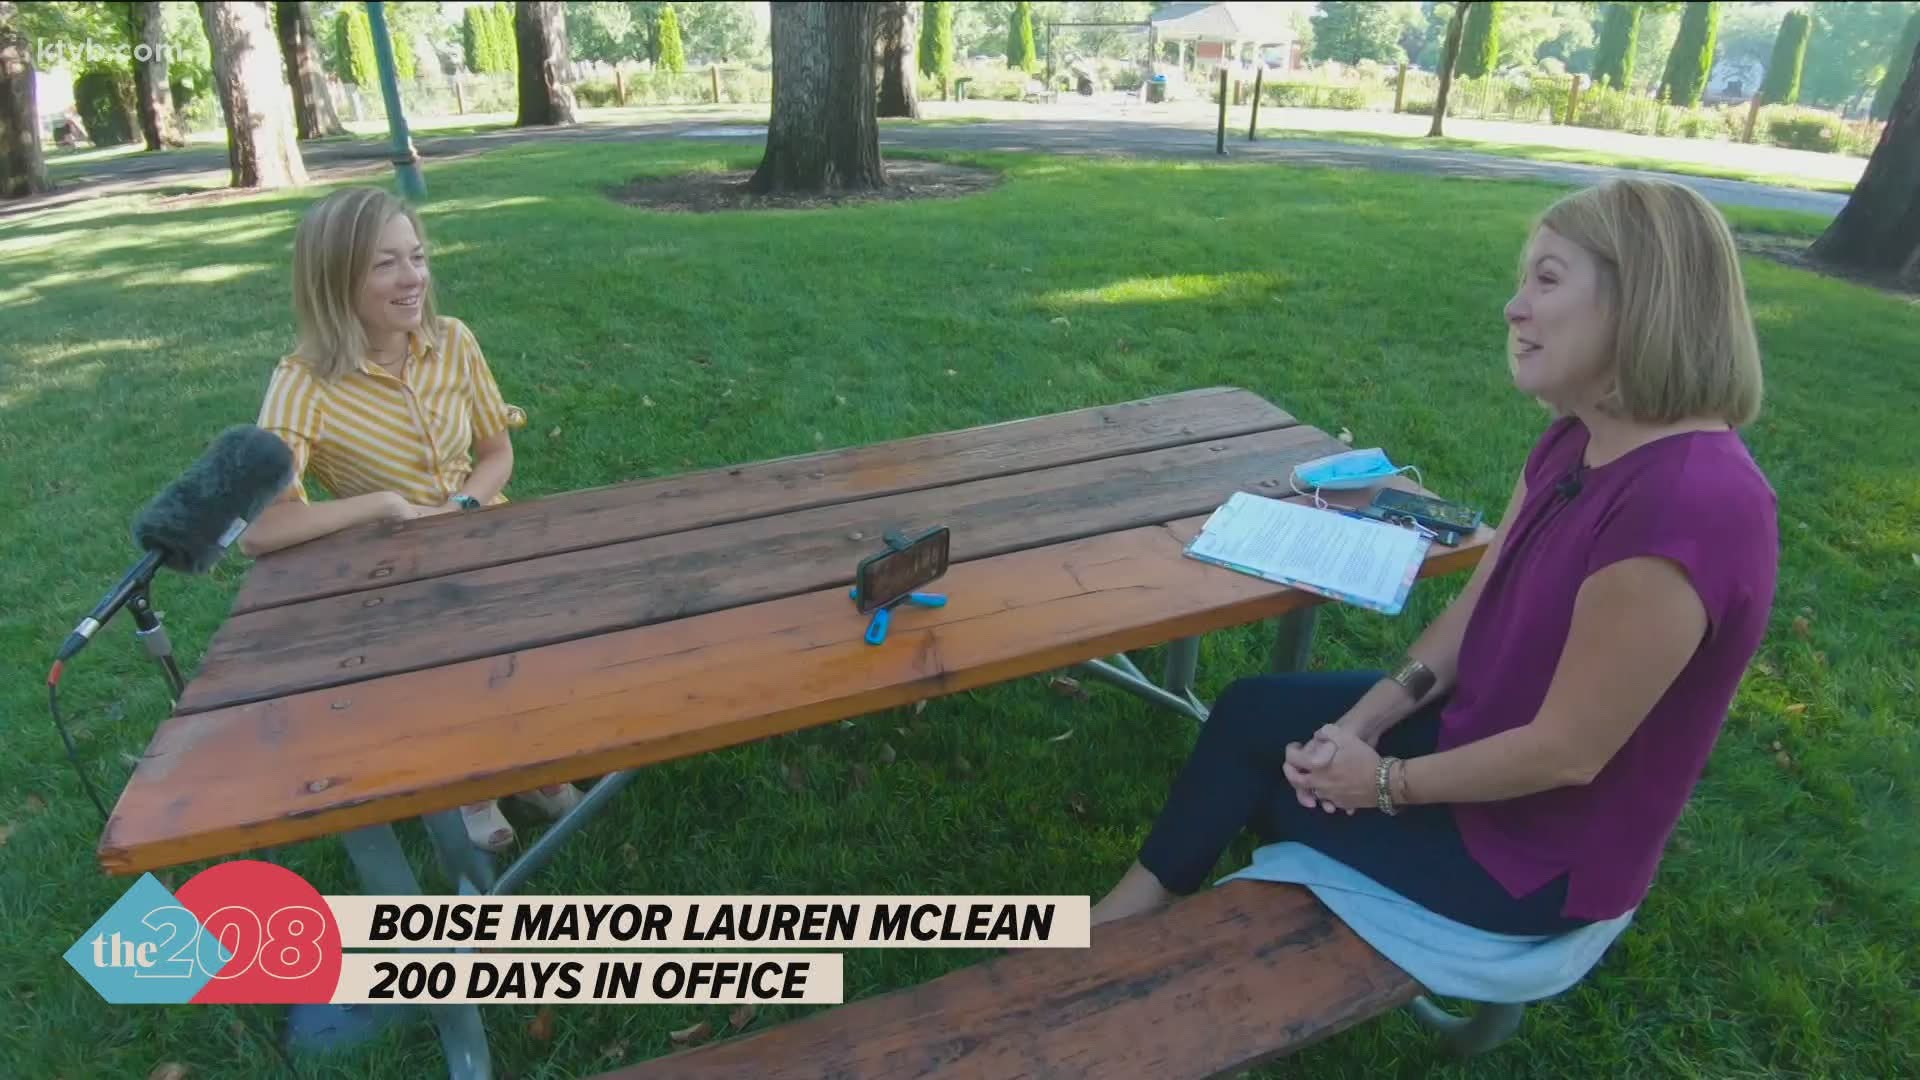 Mayor Lauren McLean sat down with KTVB to discuss the pandemic, Boise's new police chief and what it has been like being the first female elected mayor of Boise.